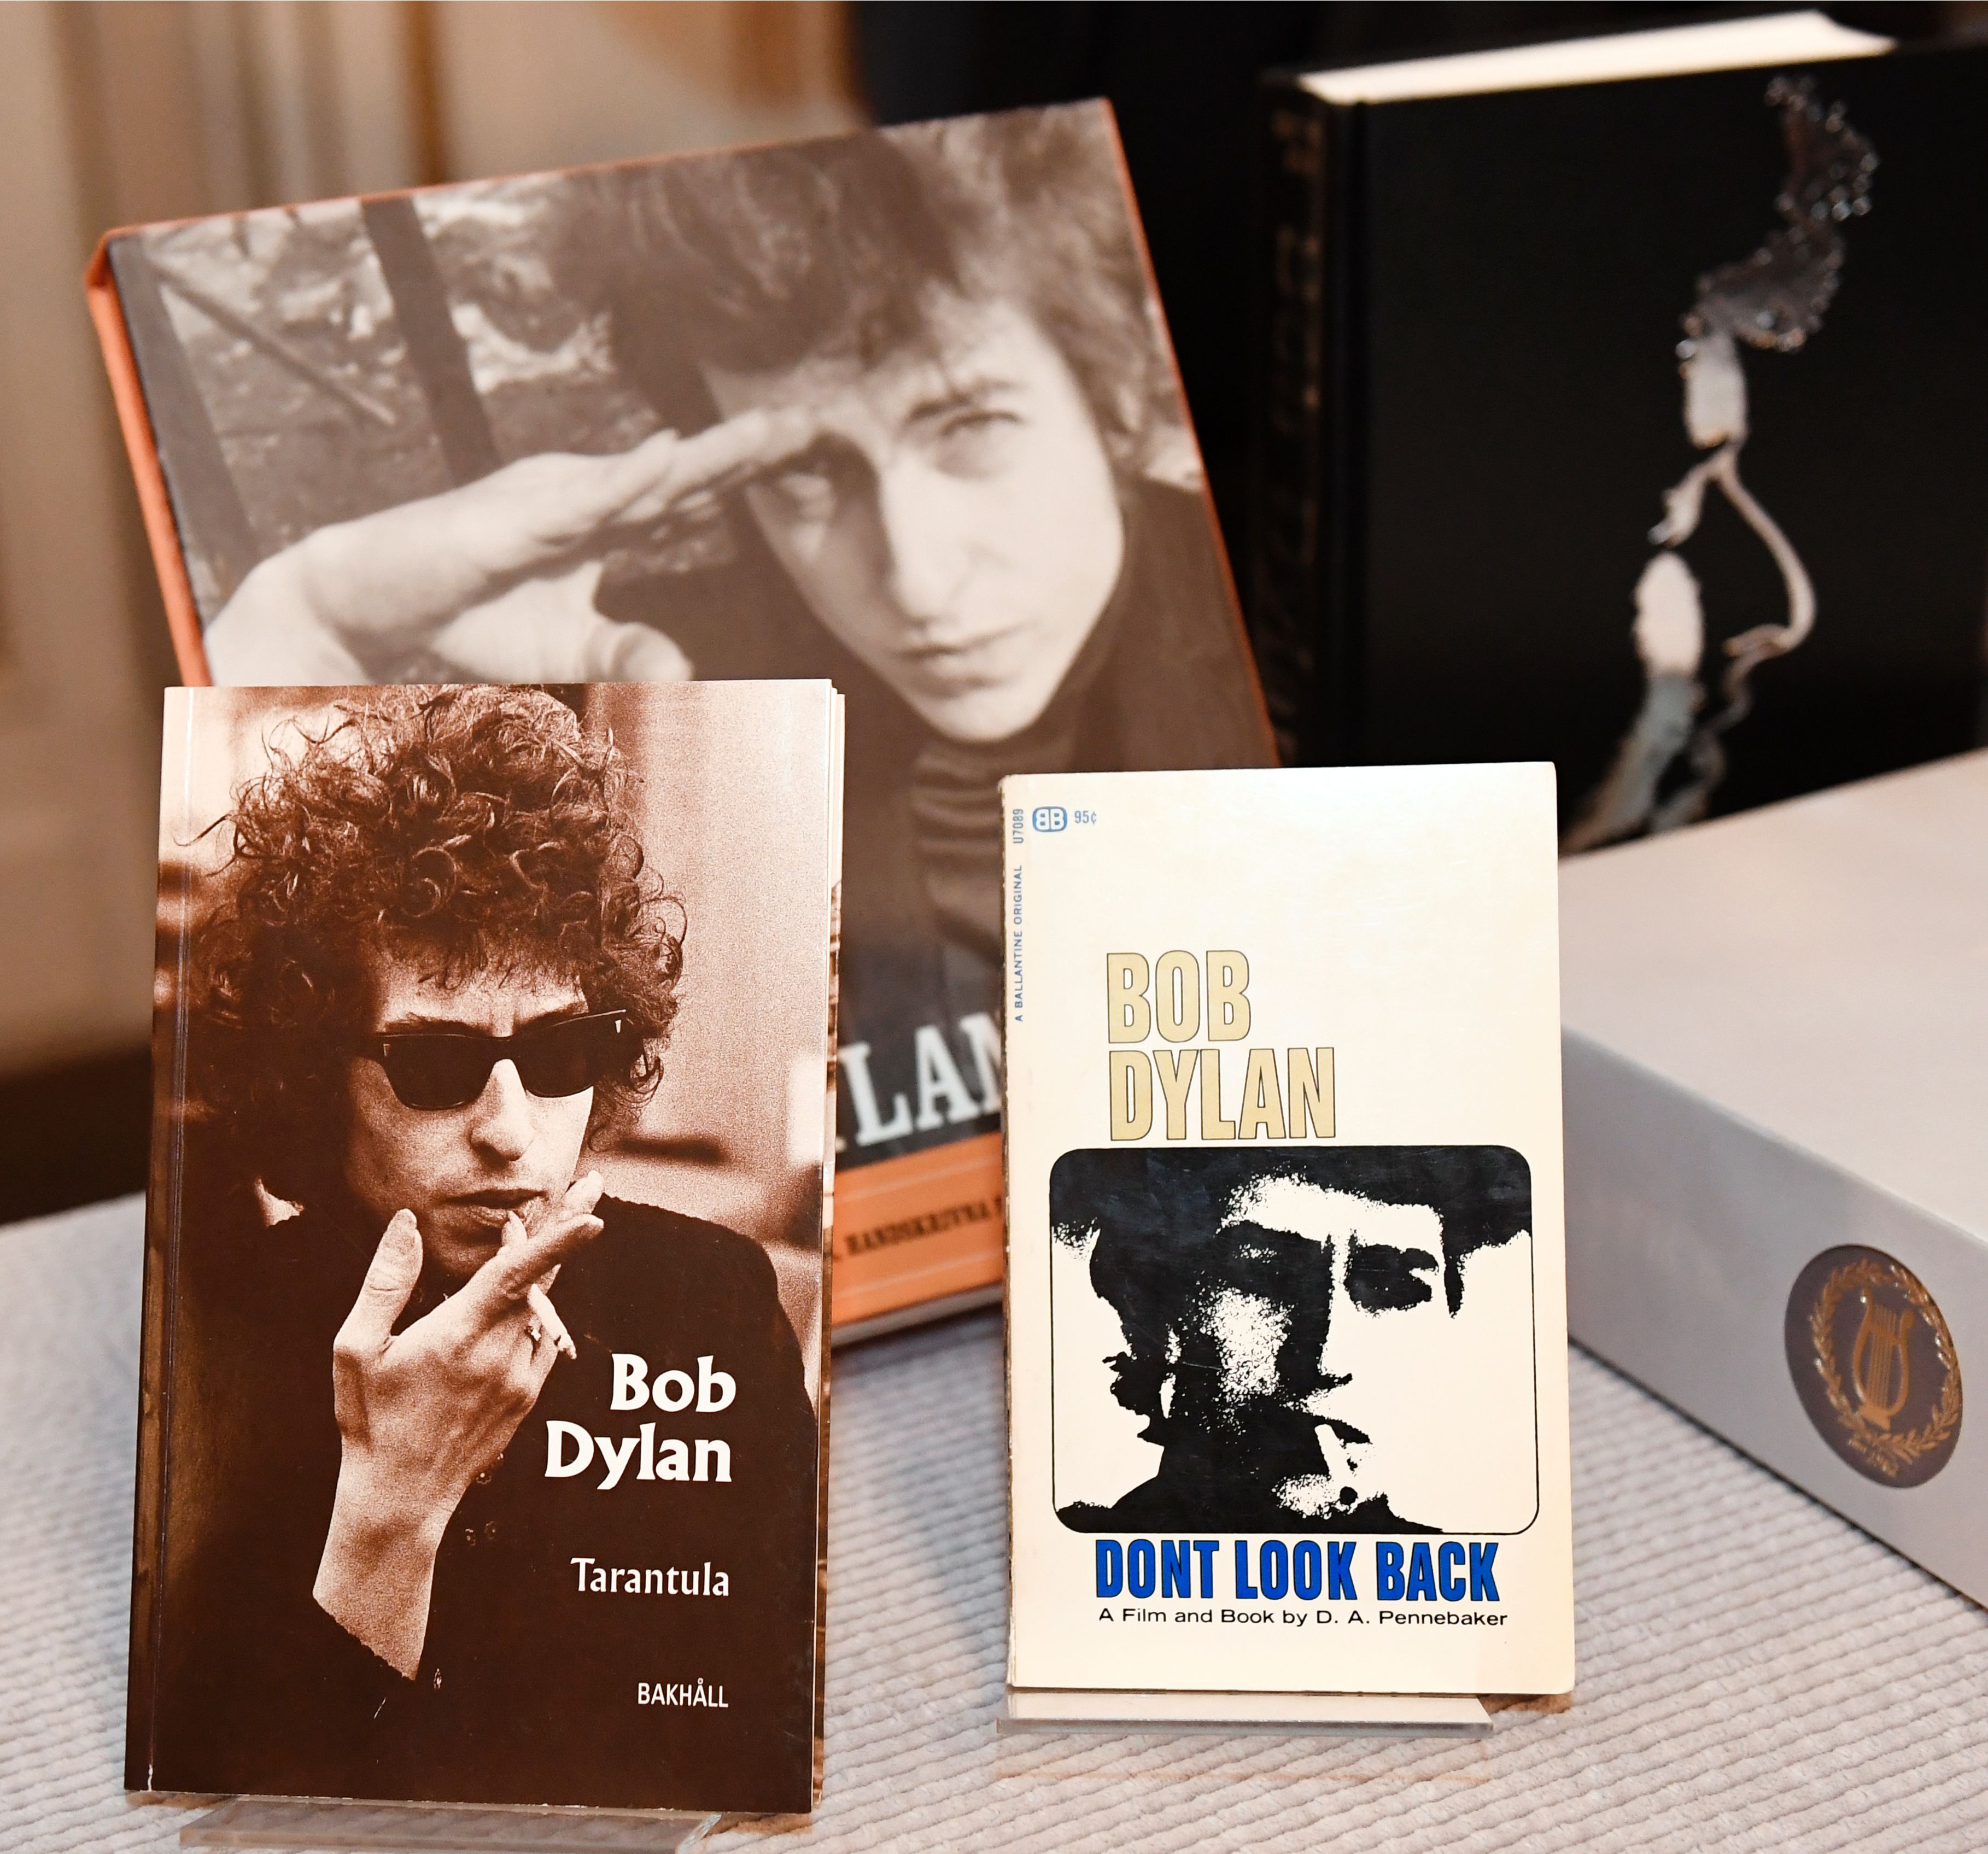 Books by and about US songwriter Bob Dylan who was announced the laureate of the 2016 Nobel Prize in Literature are displayed at the Swedish Academy in Stockholm, Sweden, on Oct. 13, 2016. (JONATHAN NACKSTRAND—AFP/Getty Images)